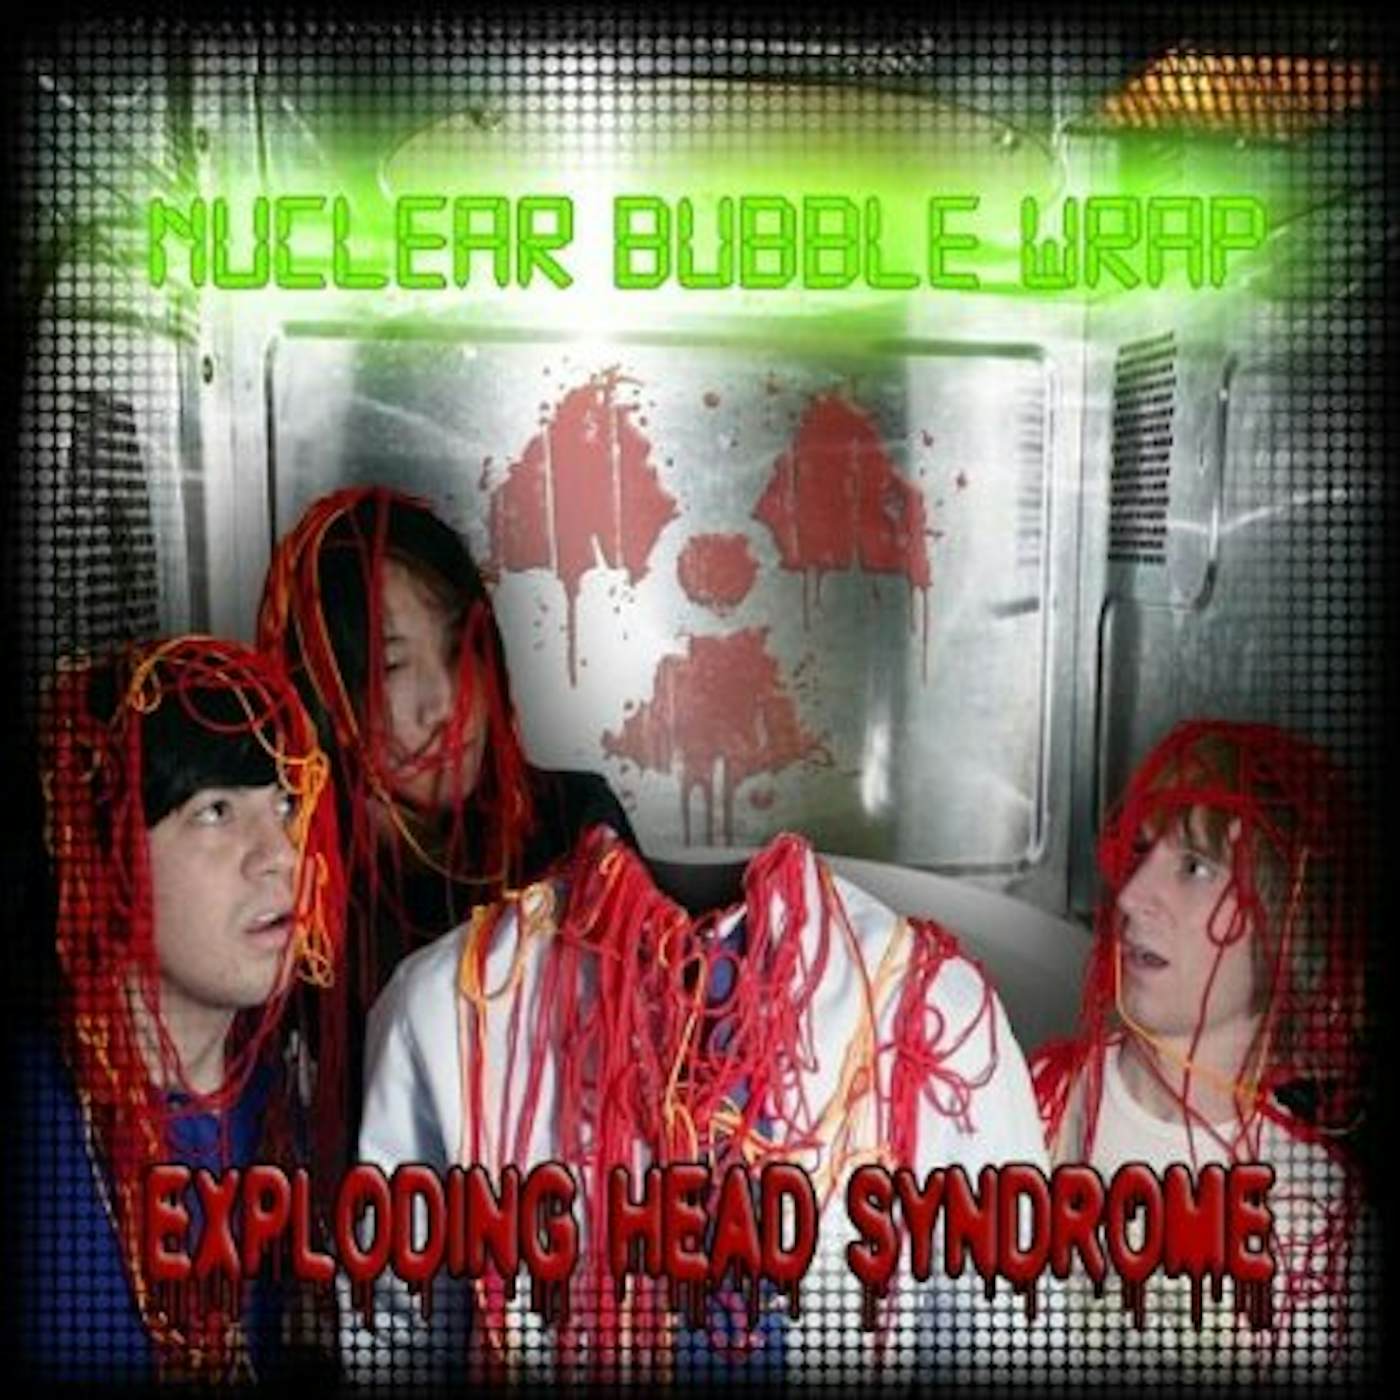 Nuclear Bubble Wrap EXPLODING HEAD SYNDROME CD